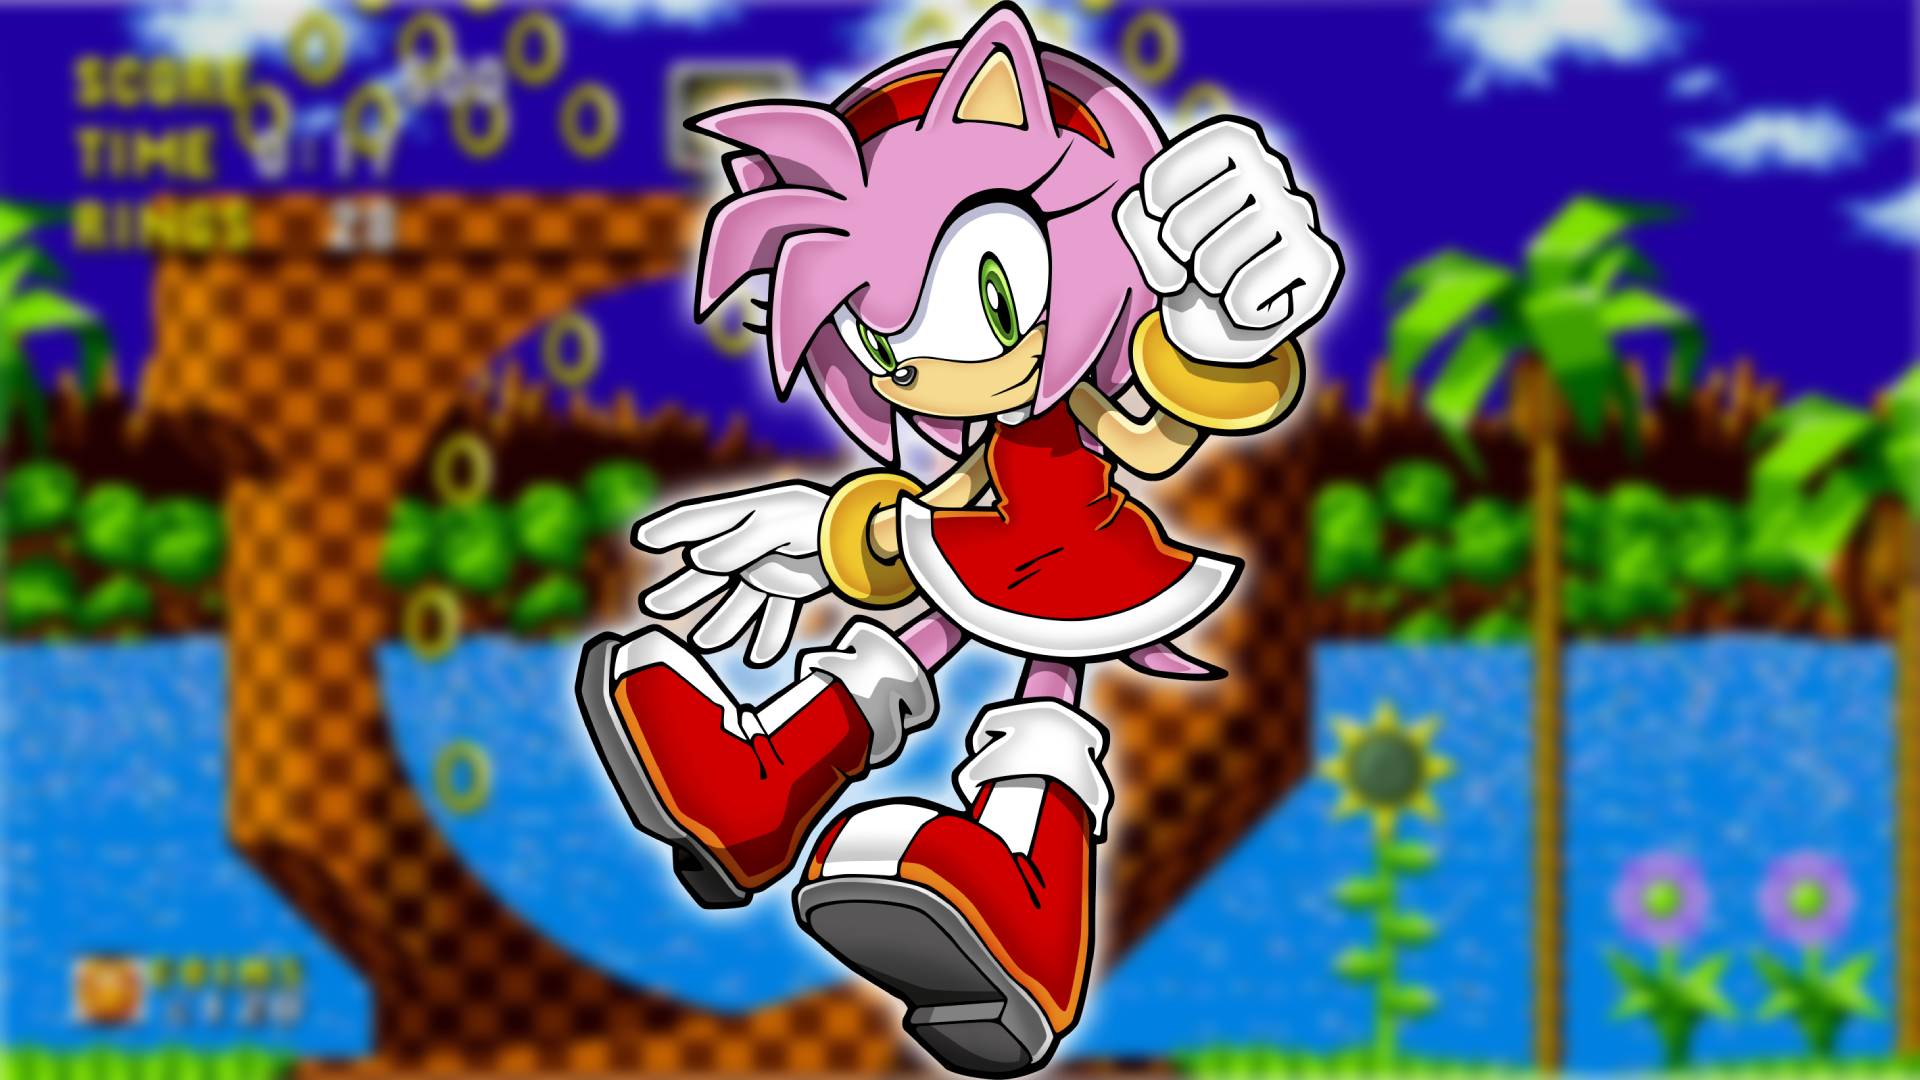 Sonic Heroes, blaze The Cat, juggling, sonic Team, Sonic Chaos, metal Sonic,  sonic Boom, sonic X, Knuckles the Echidna, Amy Rose